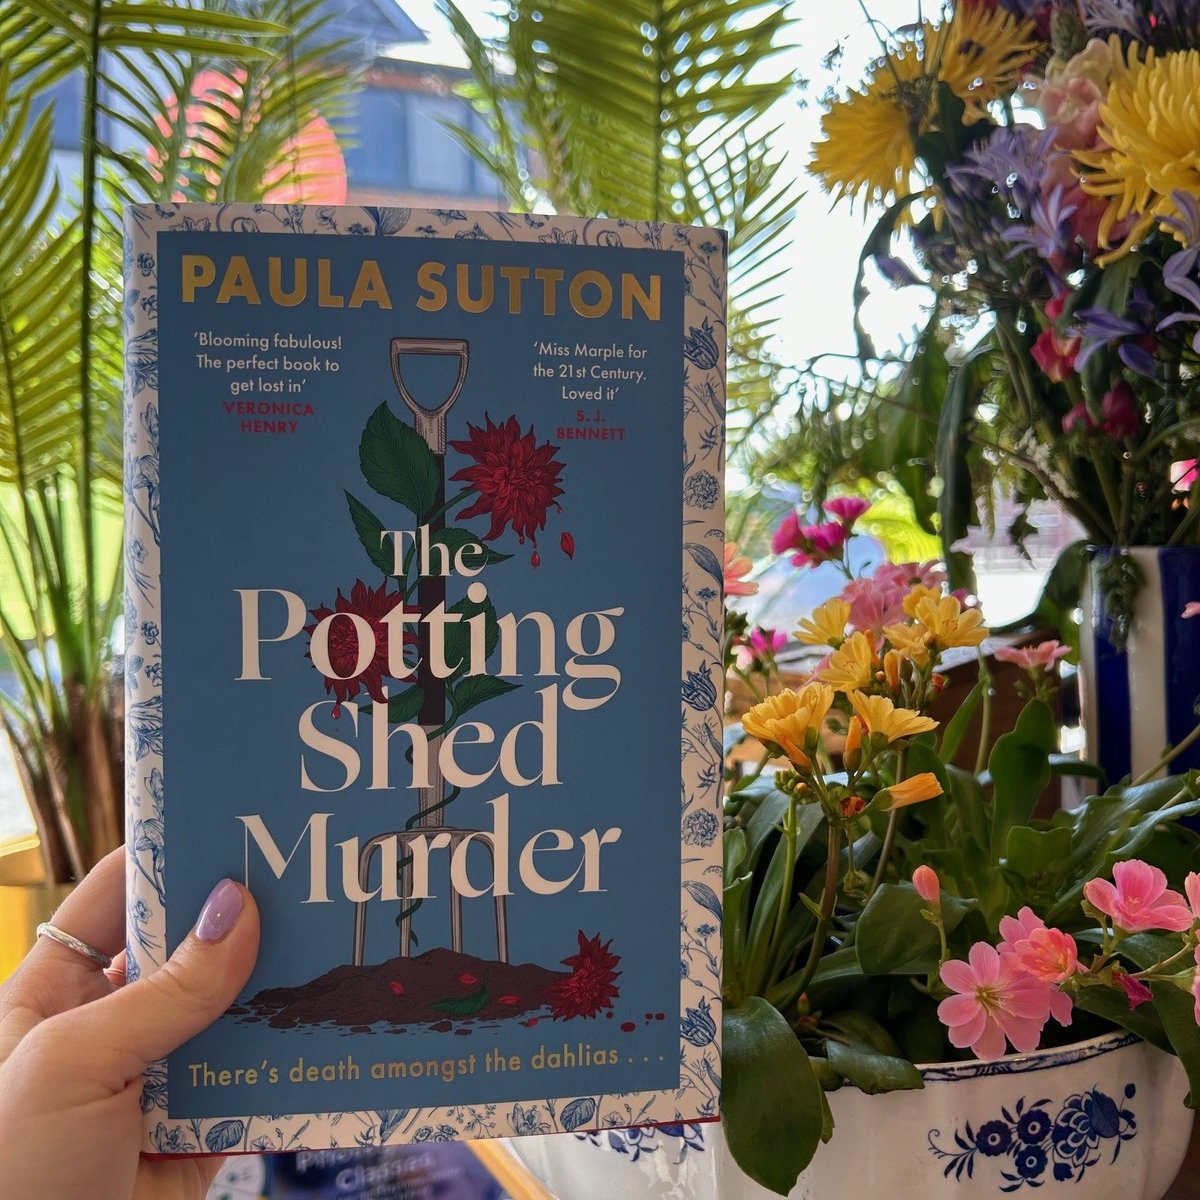 Cosy Crime with Paula Sutton🌺 Thurs 9 May, 7.30pm Welcome to the sleepy village of Pudding Corner, a quintessentially English haven of golden cornfields, winding cobbled lanes … and murder. To book your place, click on the link below: sevenoaksbookshop.co.uk/cosy-crime-wit…